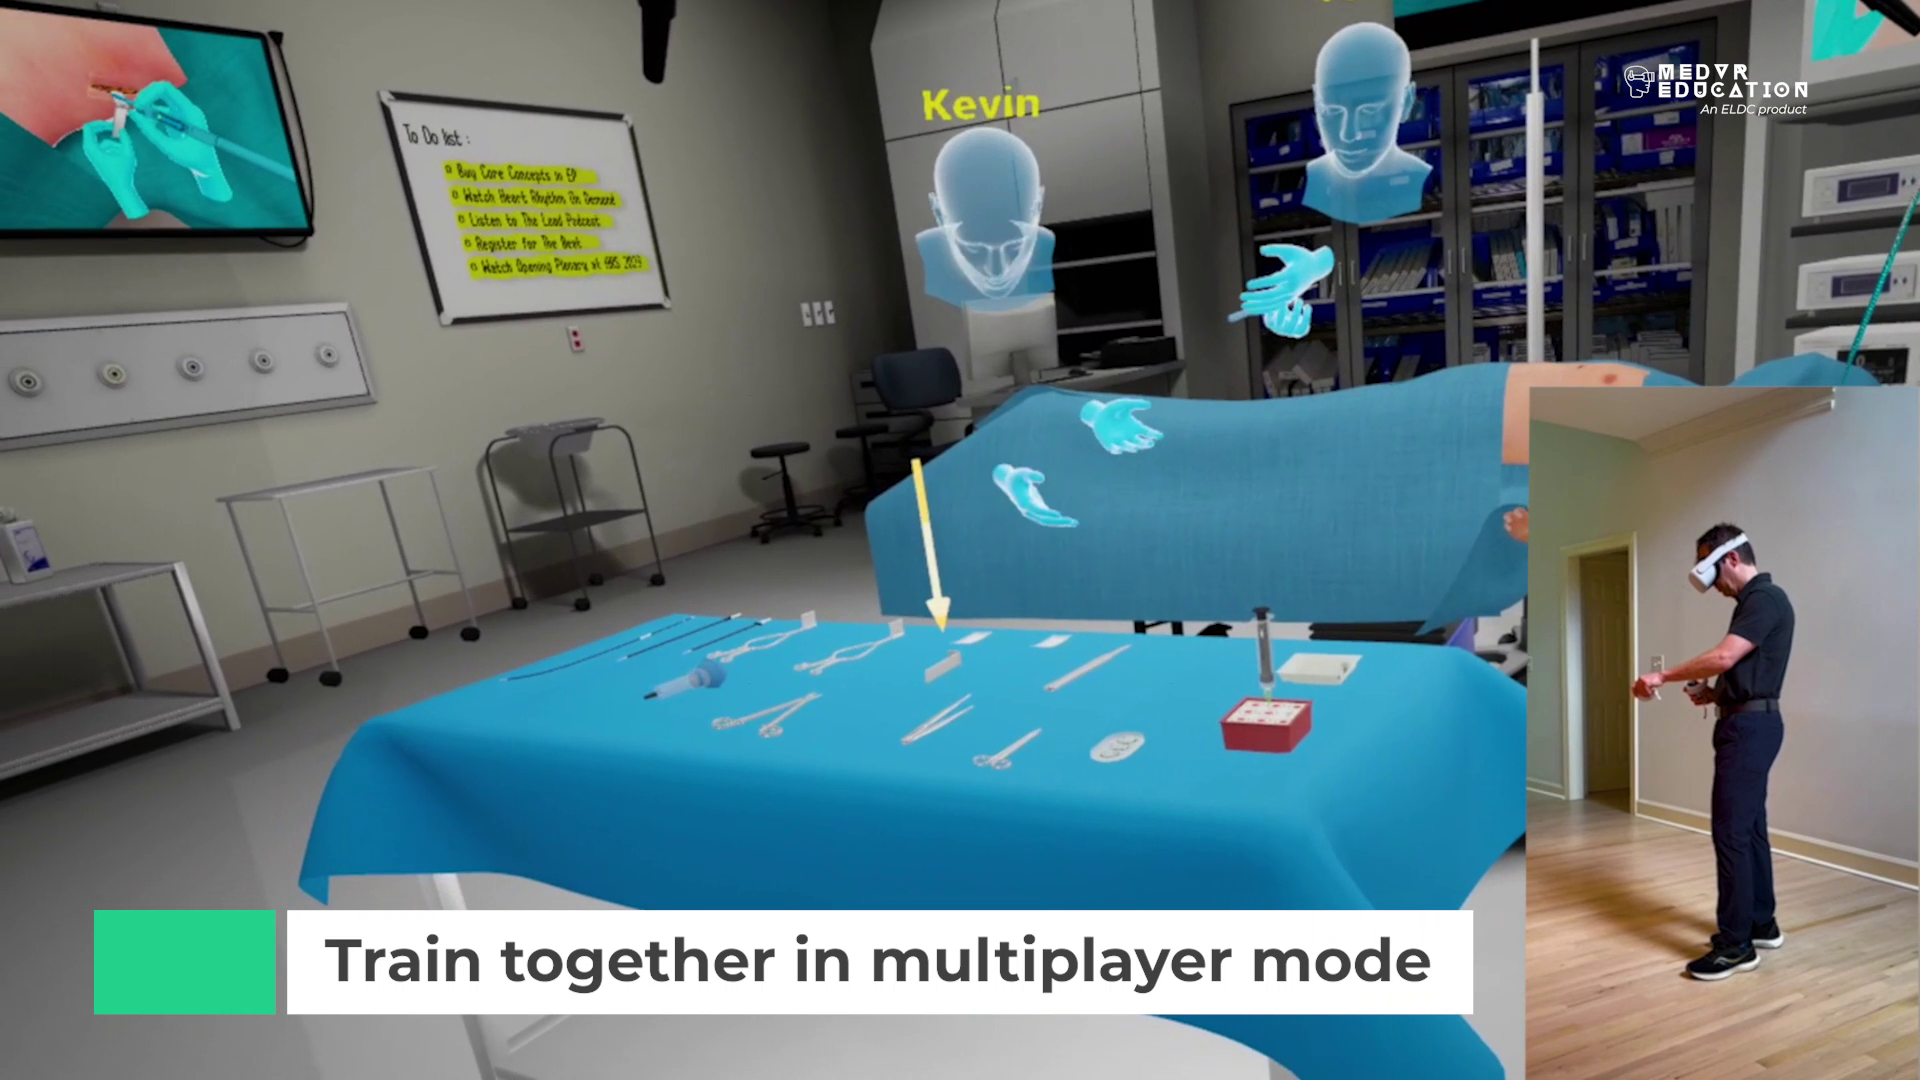 Displaying multiplayer mode training in VR for an electrophysiology procedure